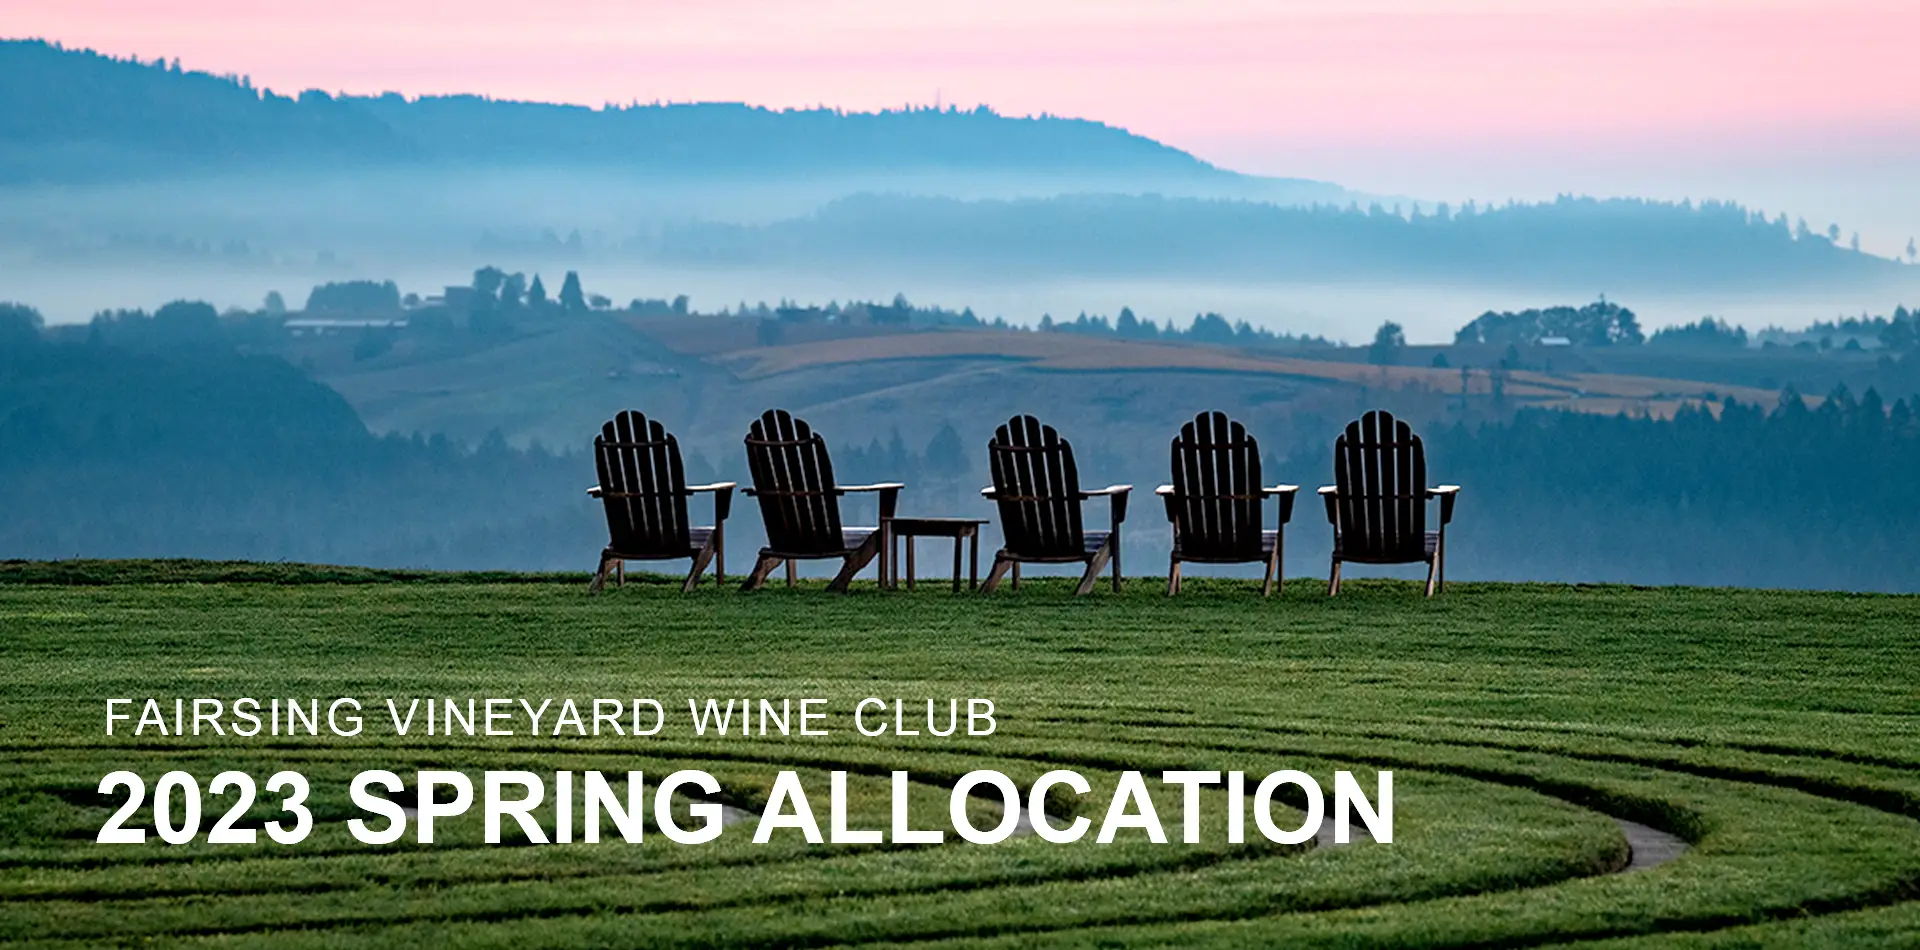 Adirondack chairs at Fairsing Vineyard great the dawn under a pink sky in Oregon's Willamette Valley